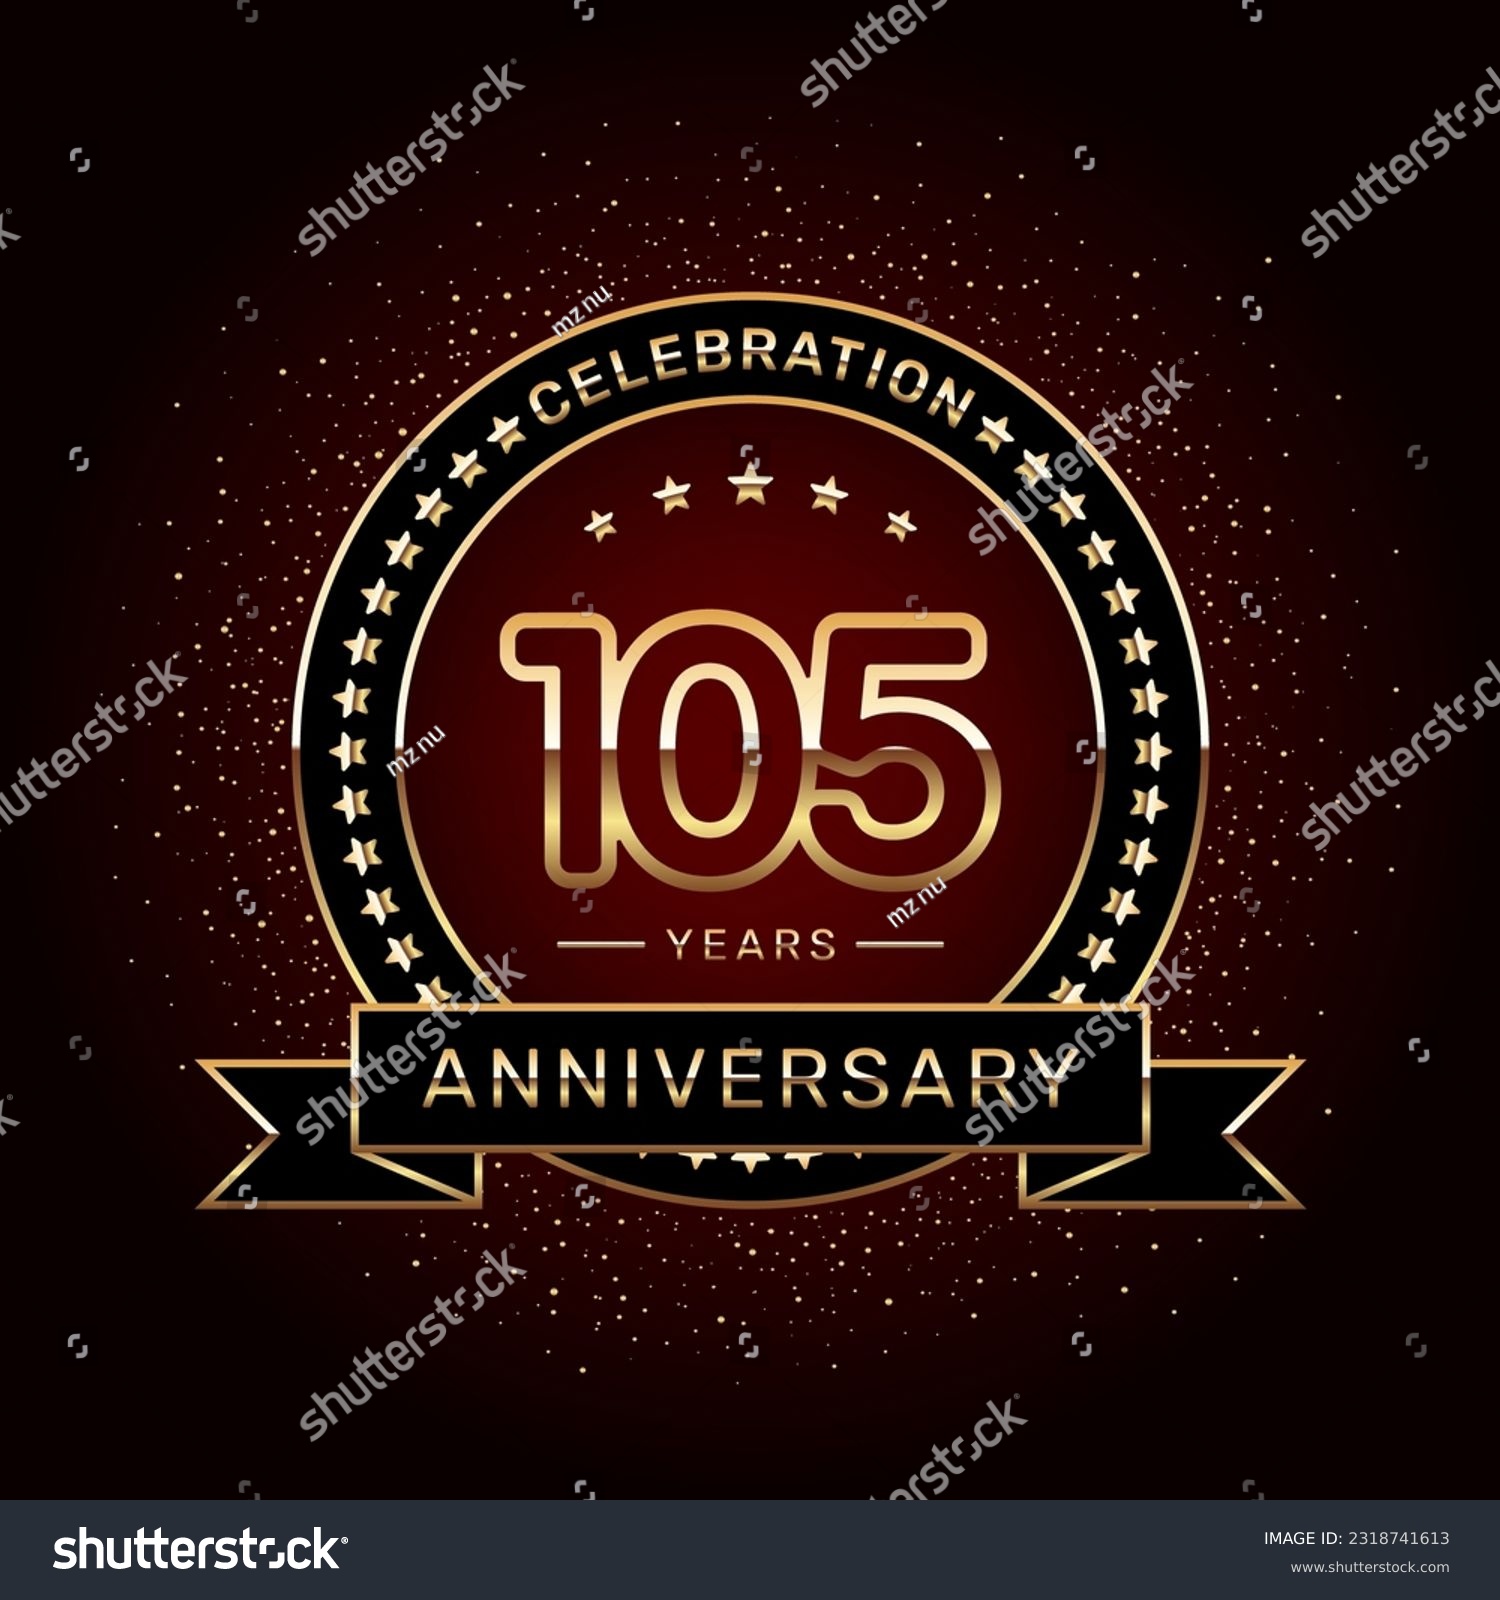 105th anniversary celebration logo design with a - Royalty Free Stock ...